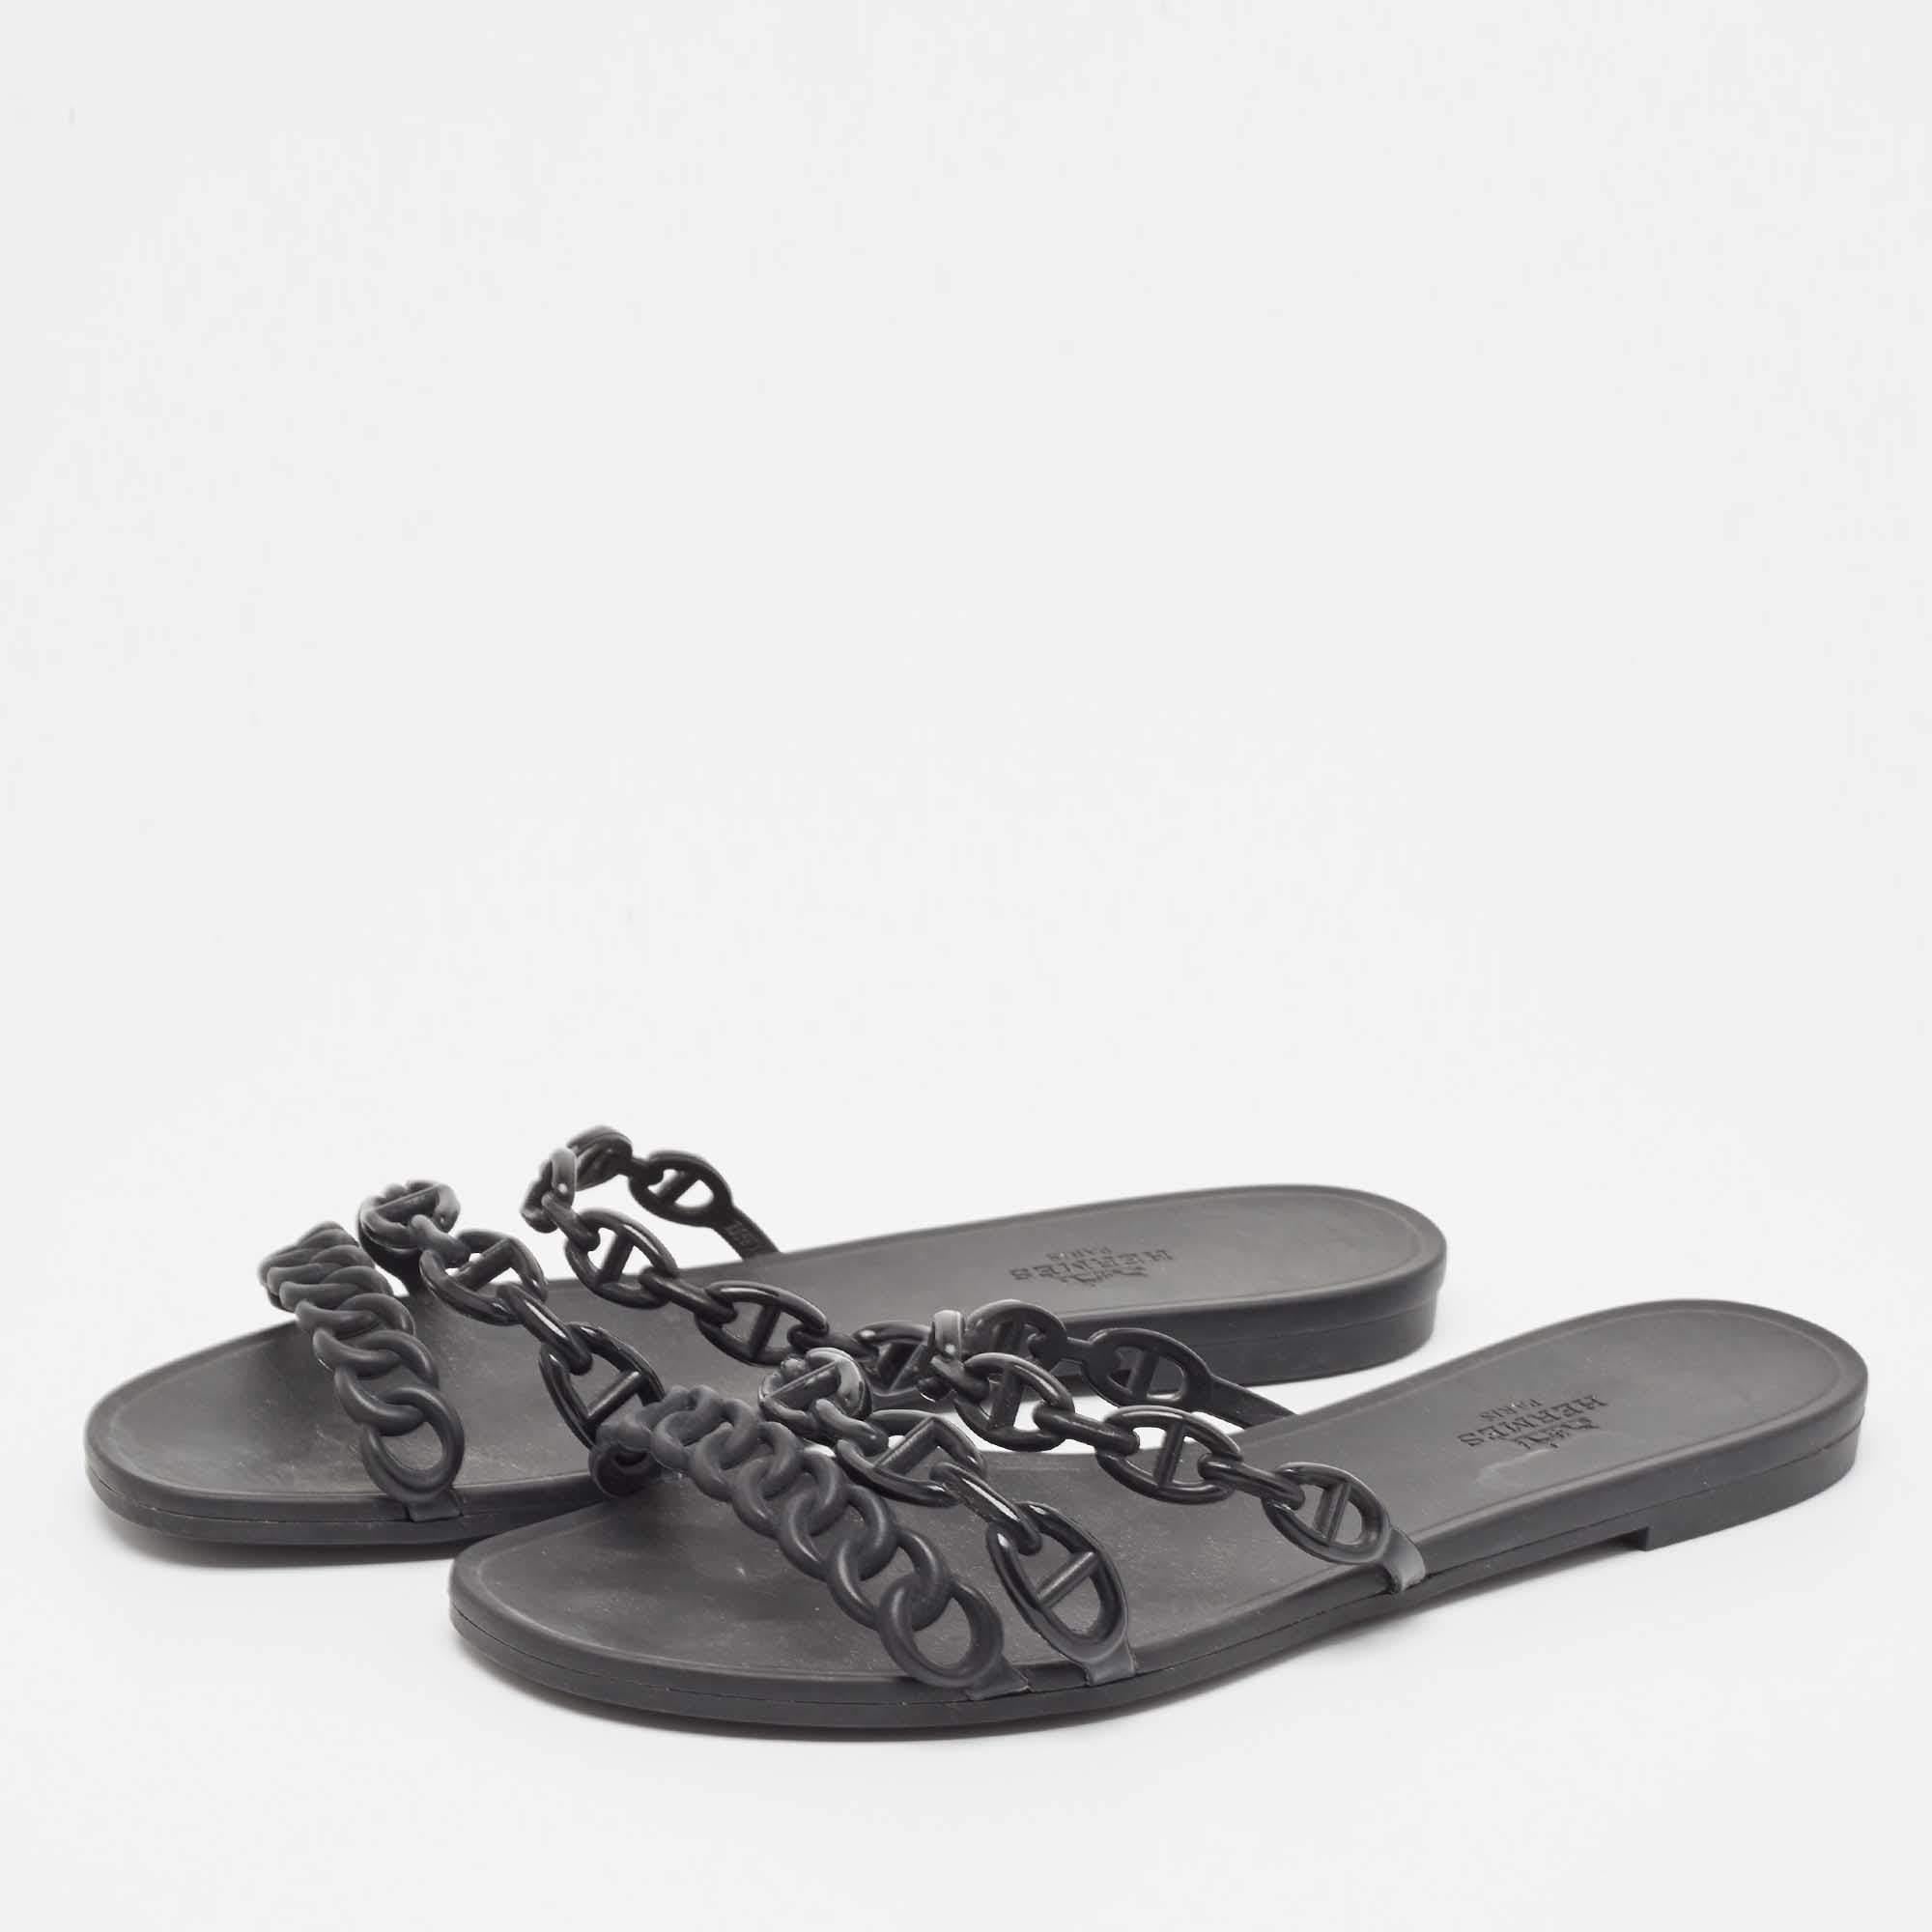 These summer-friendly Chaine d'ancre Rivage sandals by Hermes have been crafted to perfection. Featuring chain-like straps in rubber, the flats are set on a comfortable base. Designed in a black hue, the flat sandals will be a delight to wear.

